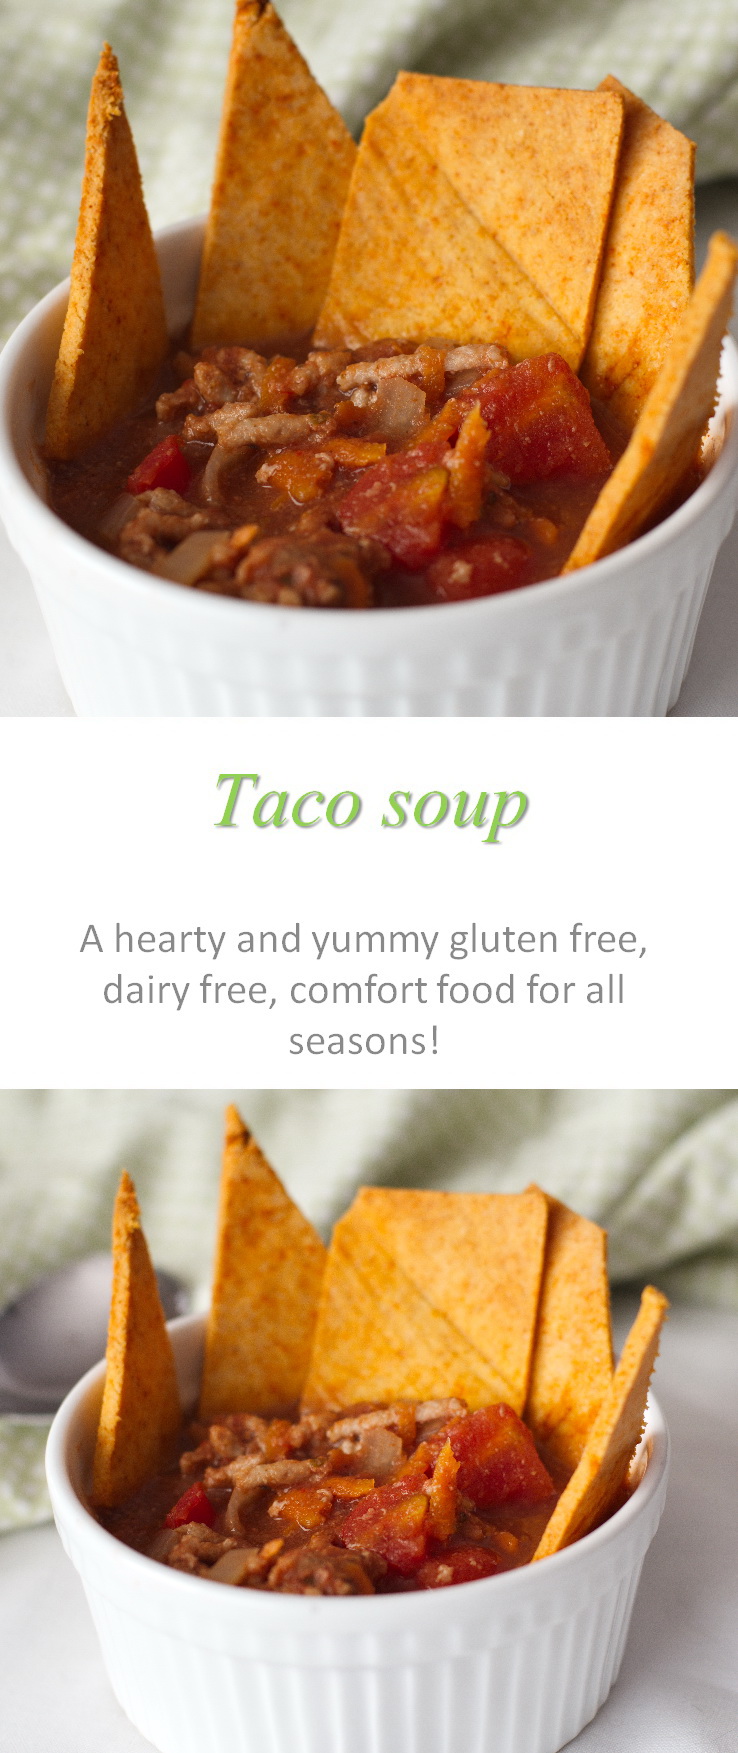 A low-calorie, gluten and dairy-free hearty taco soup that is healthy comfort food. #tacosoup